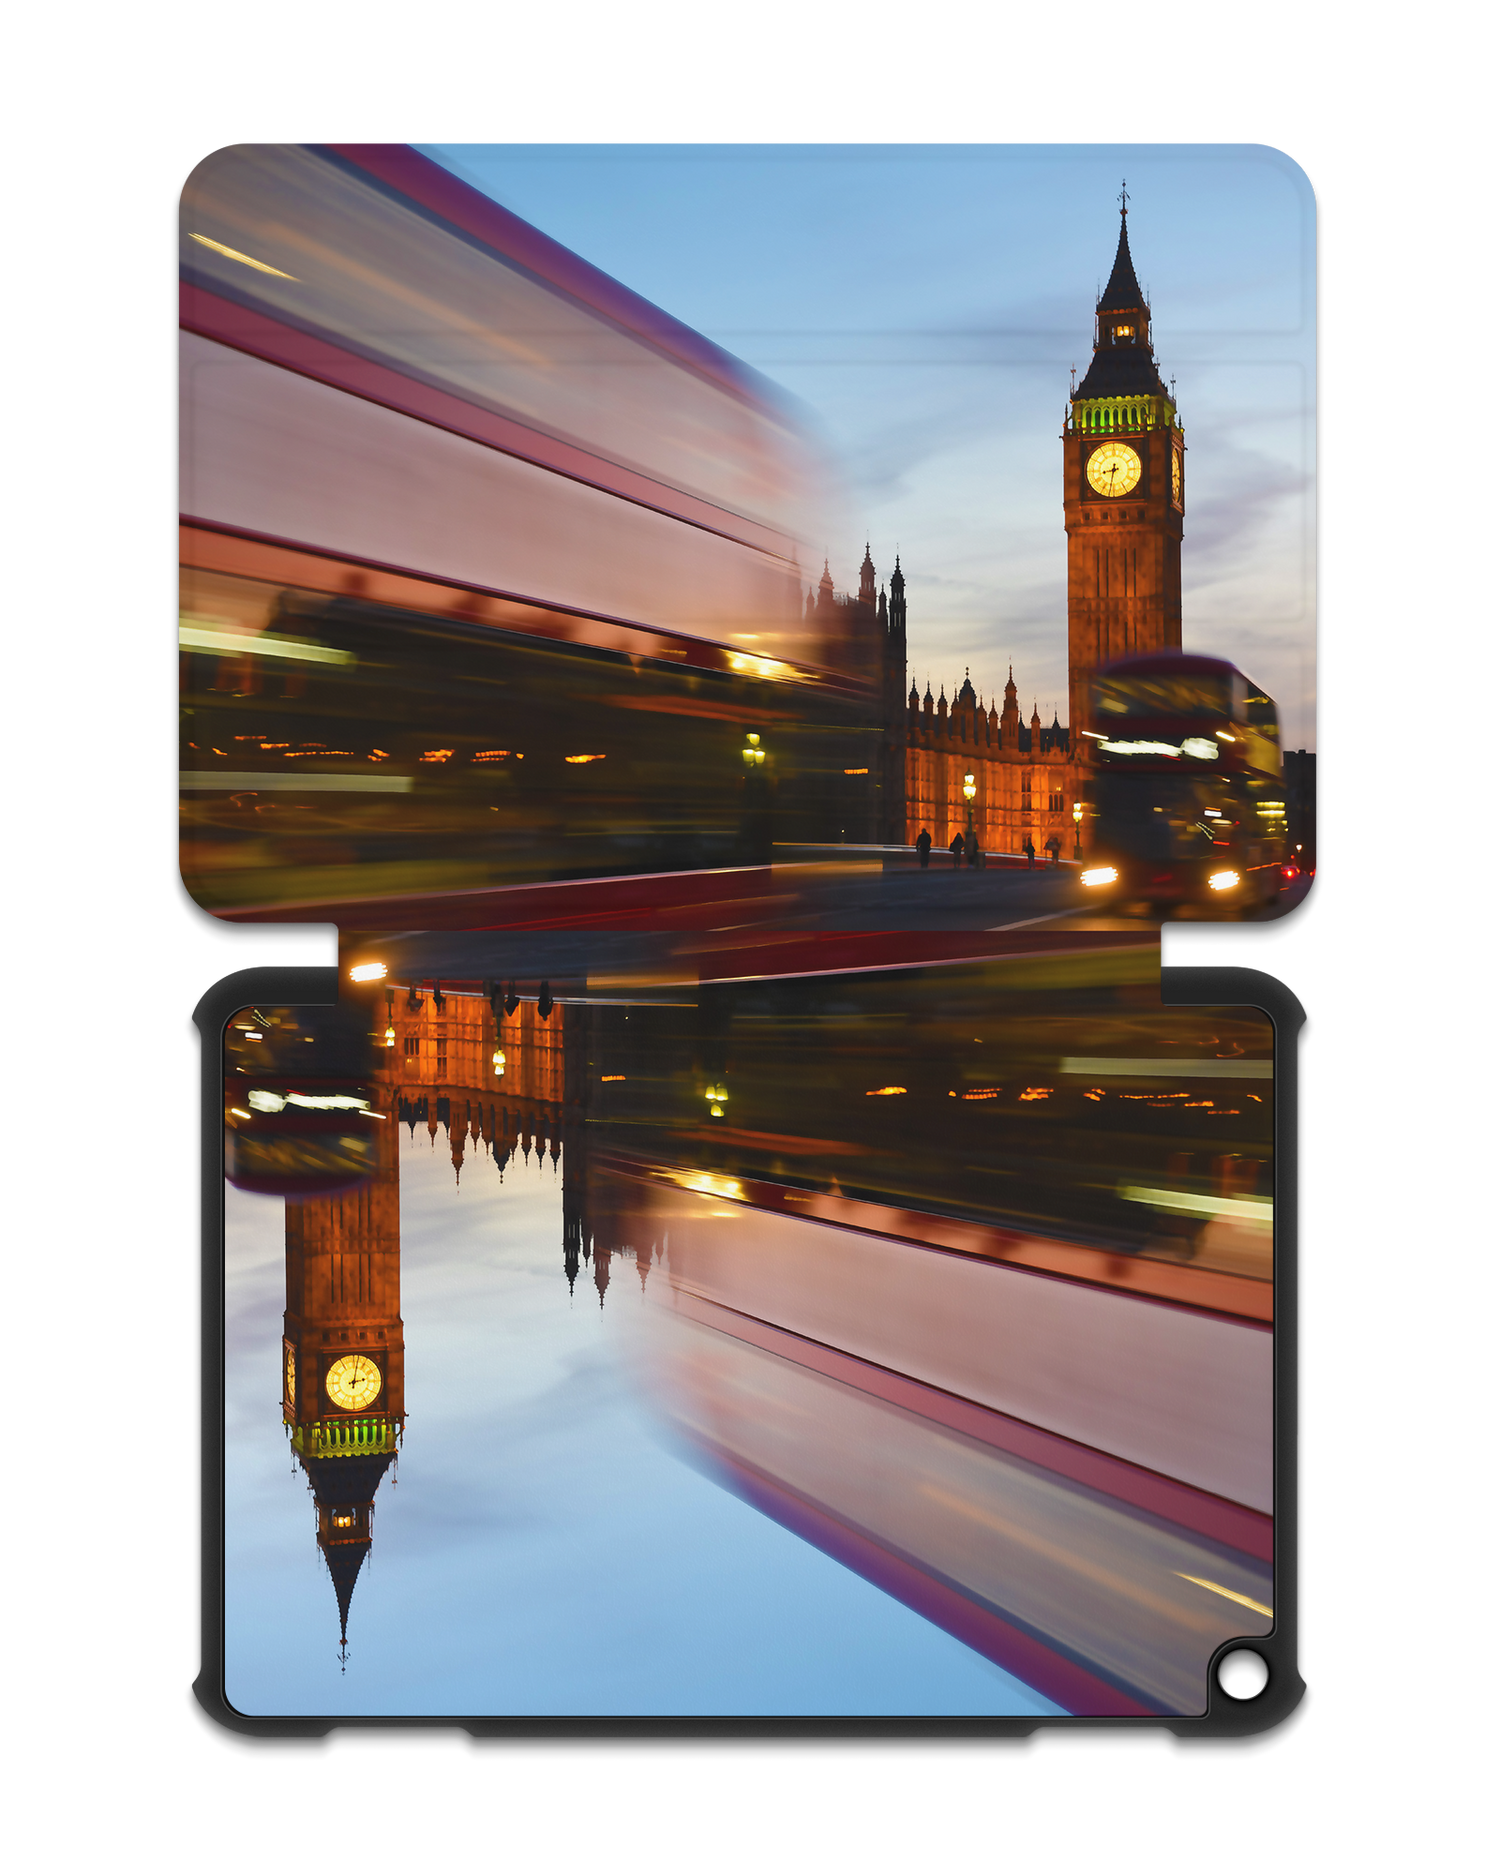 London Tablet Smart Case for Amazon Fire HD 8 (2022), Amazon Fire HD 8 Plus (2022), Amazon Fire HD 8 (2020), Amazon Fire HD 8 Plus (2020): Opened